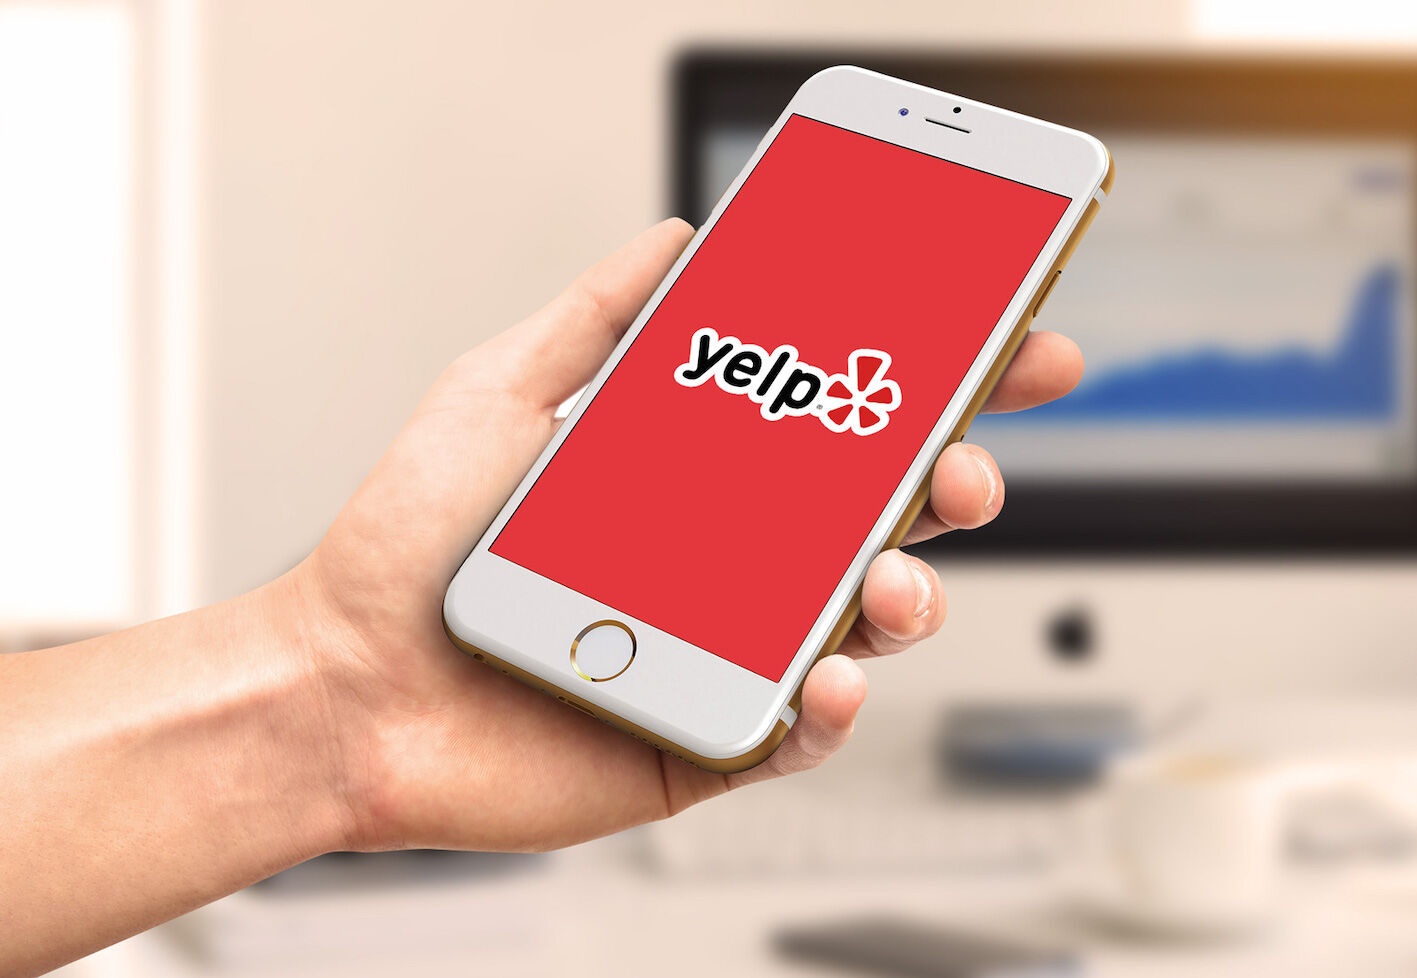 How To Use Yelp And Make Your Business Stand Out